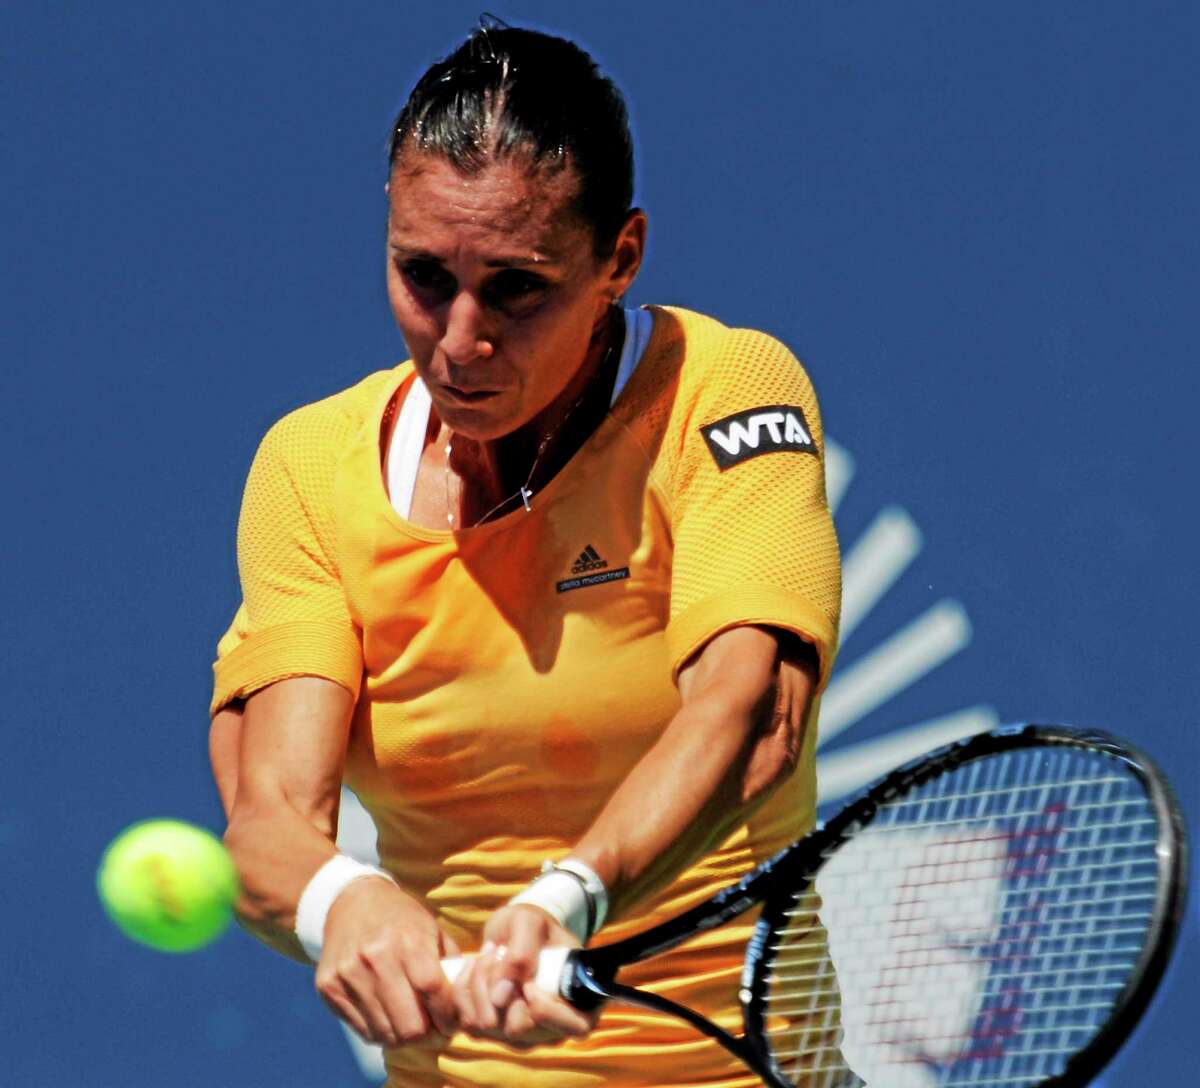 No. 6 Flavia Pennetta was upset by American Alison Riske 6-1, 7-6 (3) on Tuesday at the Connecticut Open at the Connecticut Tennis Center.